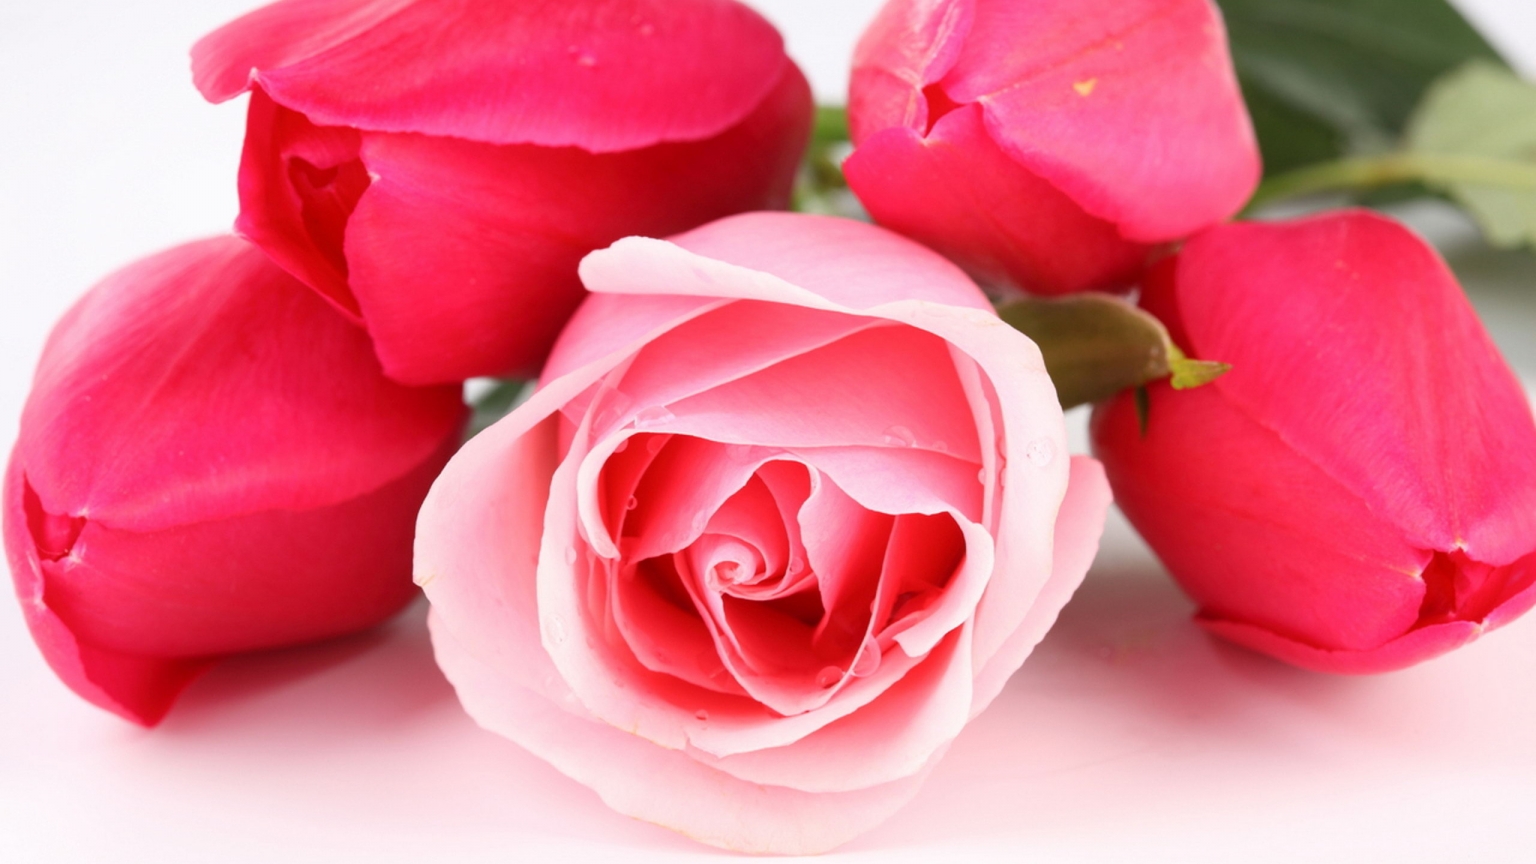 Rose and Tulips for 1536 x 864 HDTV resolution